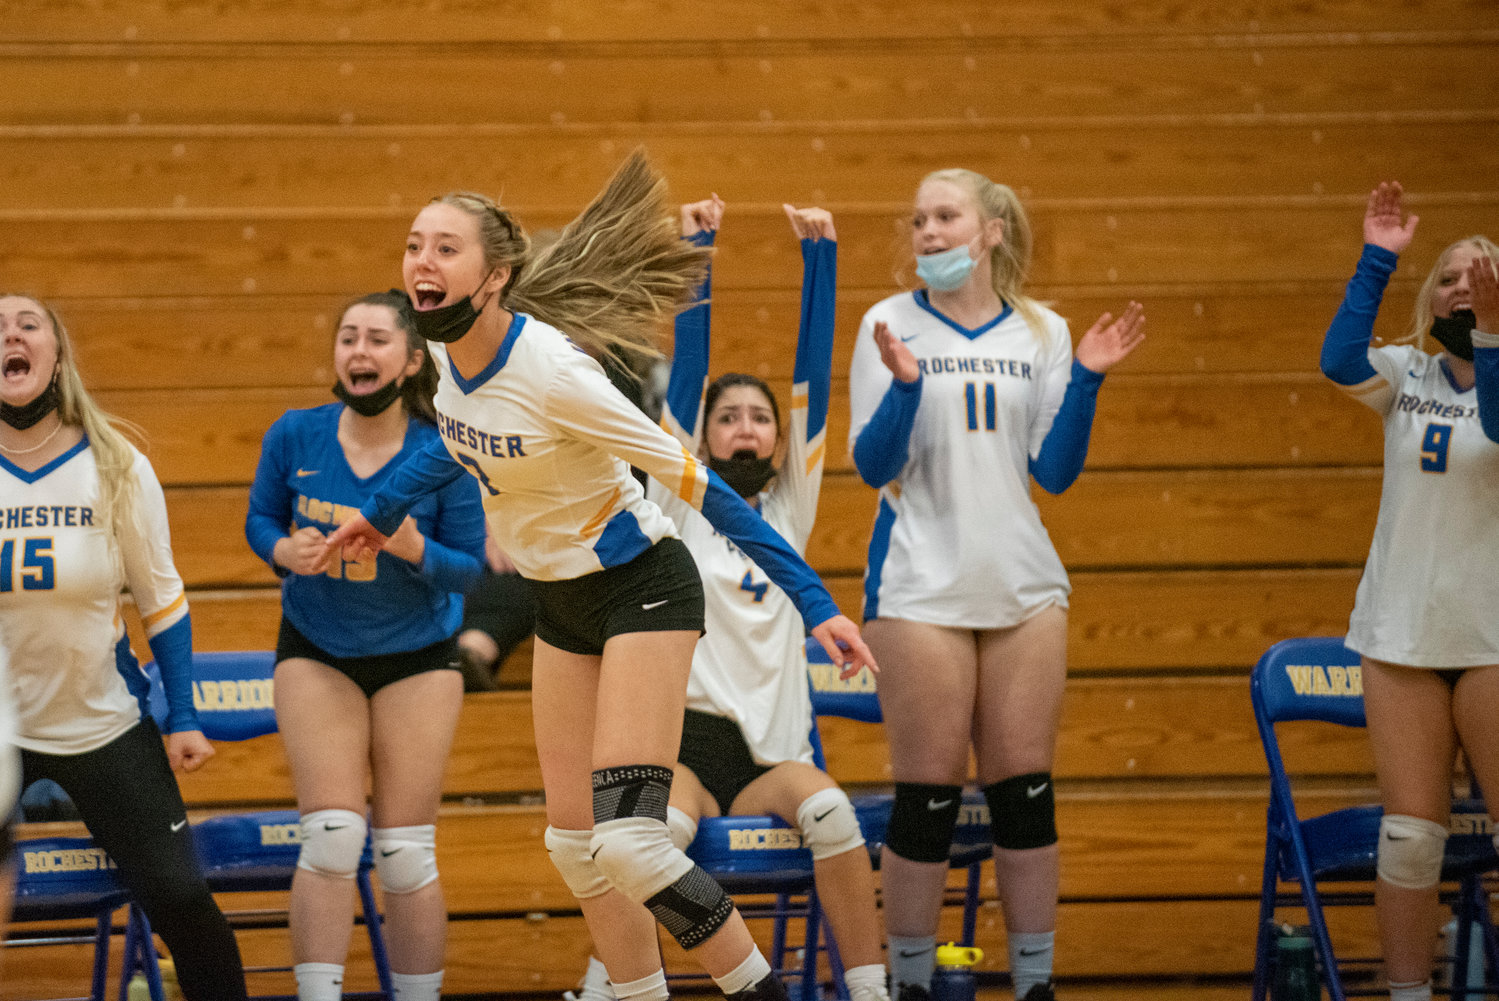 Rochester celebrates a point against Montesano on Monday.